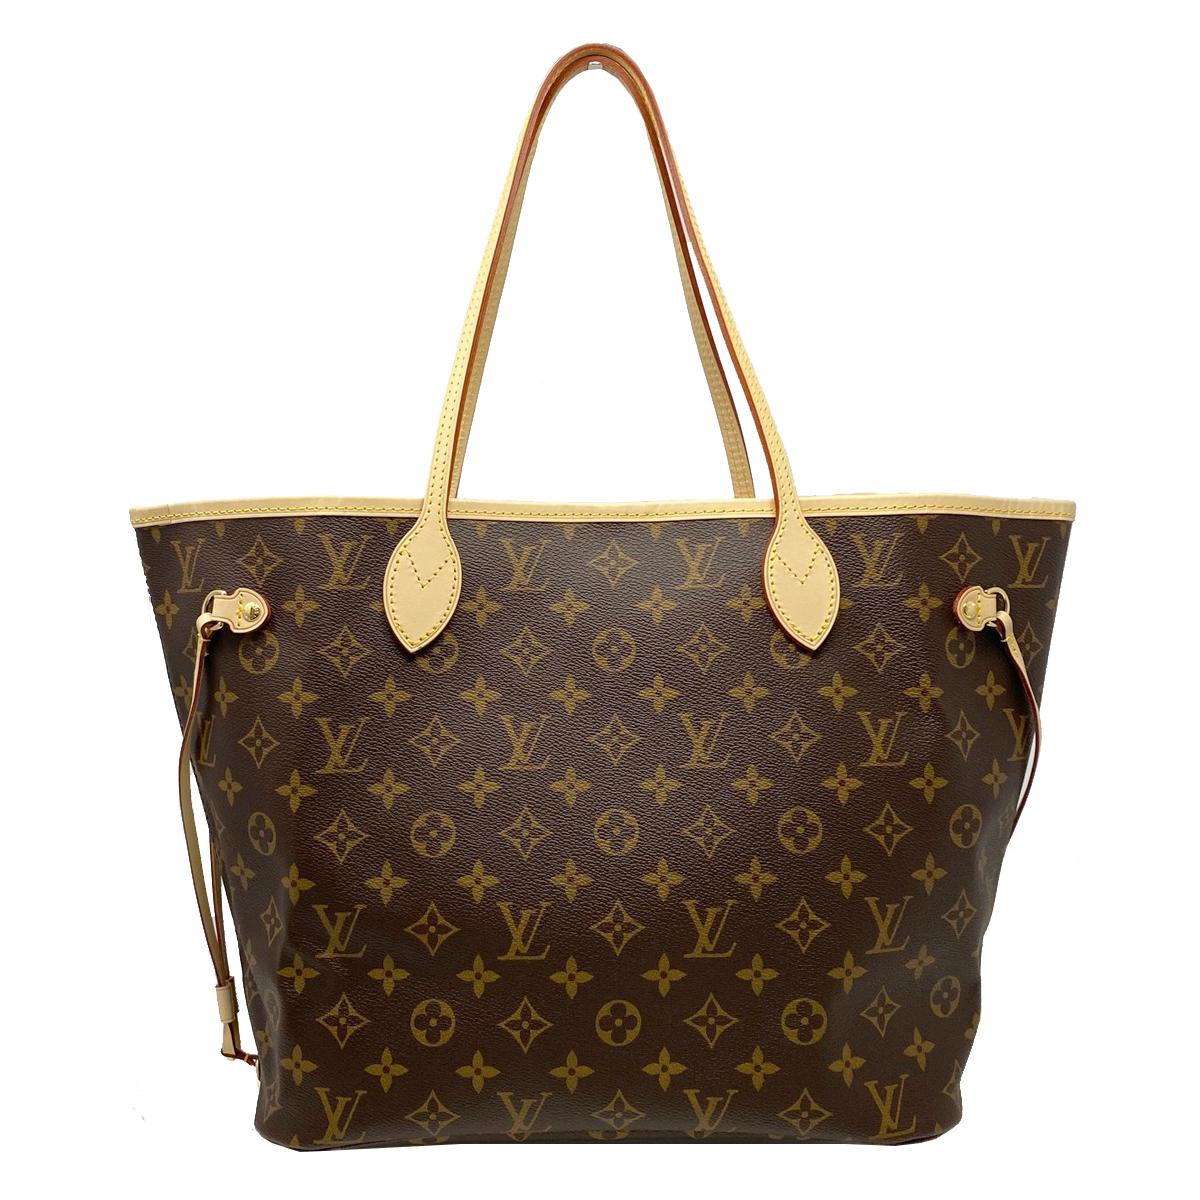 Company-Louis Vuitton
Model- Neverfull MM Cherry Monogram Leather Canvas Tote
Color-Brown 
Date Code-SD4220
Material-Monogram Leather Canvas
Measurements-11.25